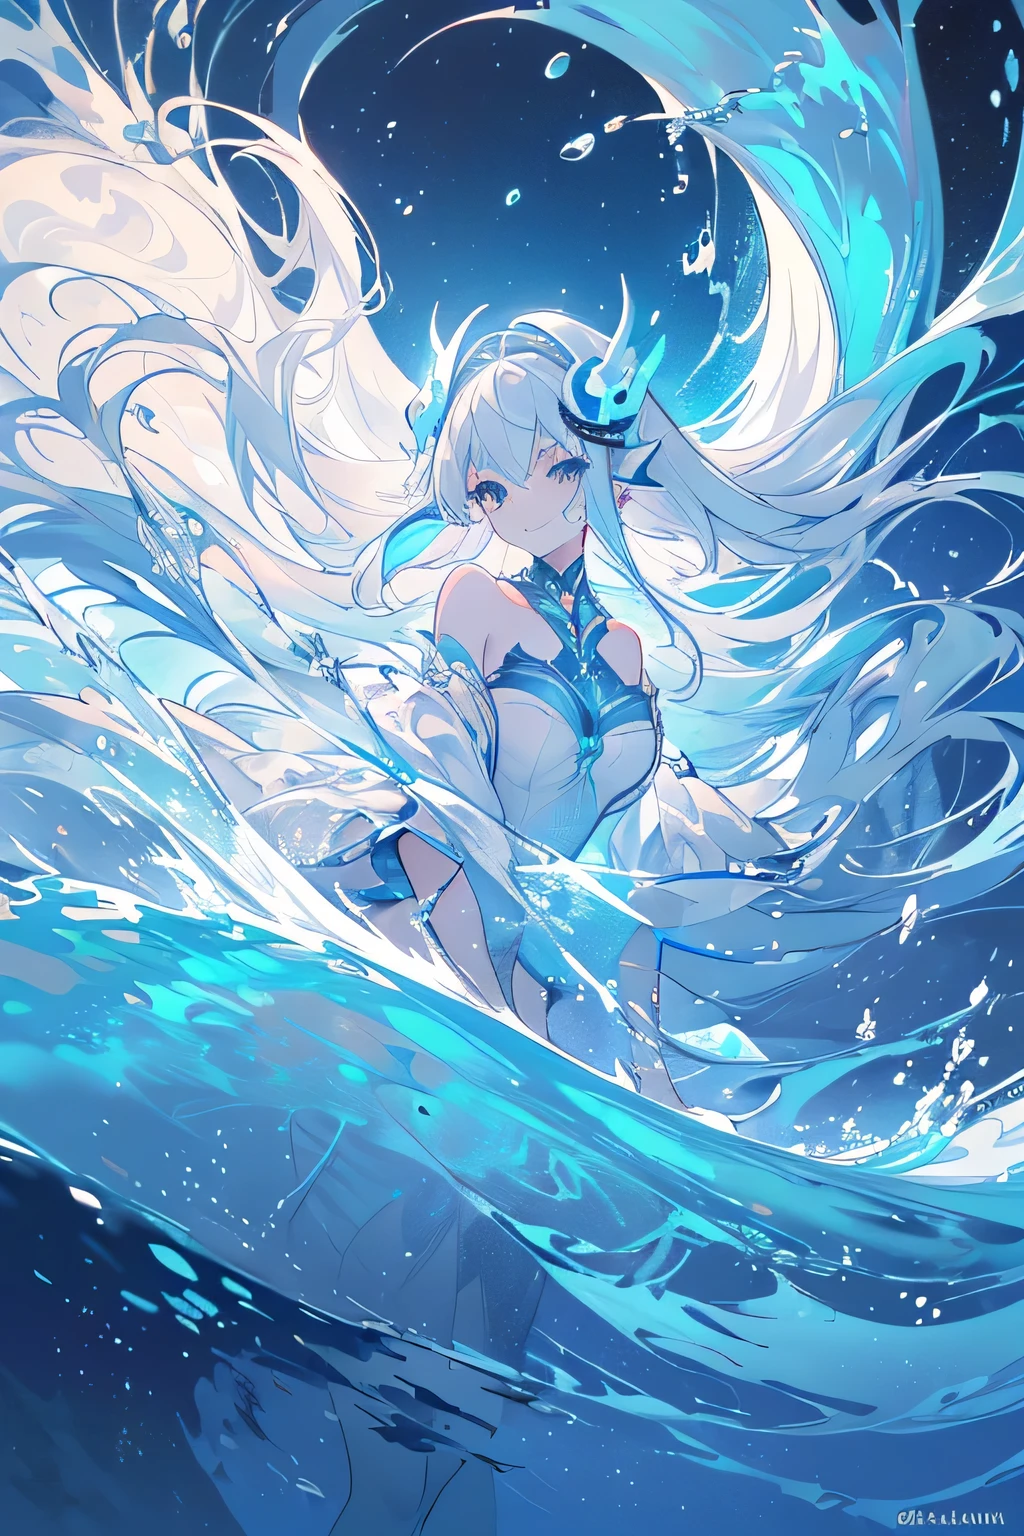 ((((sea-blue skin flowing white hair, Aquascend-powered fins:0.9))), 1girl, smiling, kneeling, (((standing on legs of Aquascend-powered tentacles))), (backsplash of waves), (glow of Aquascend on fins), (ocean floor in the distance), (detailed facial features), (lively eyes), (scaly skin), (breathing apparatus on face), (Aquascend-powered eye mask), (long hair flowing behind), (calm and peaceful environment), wanly lit, high contrast, sea creatures surrounding), ((focus on central character)), ( majestic background), ((defined subject))